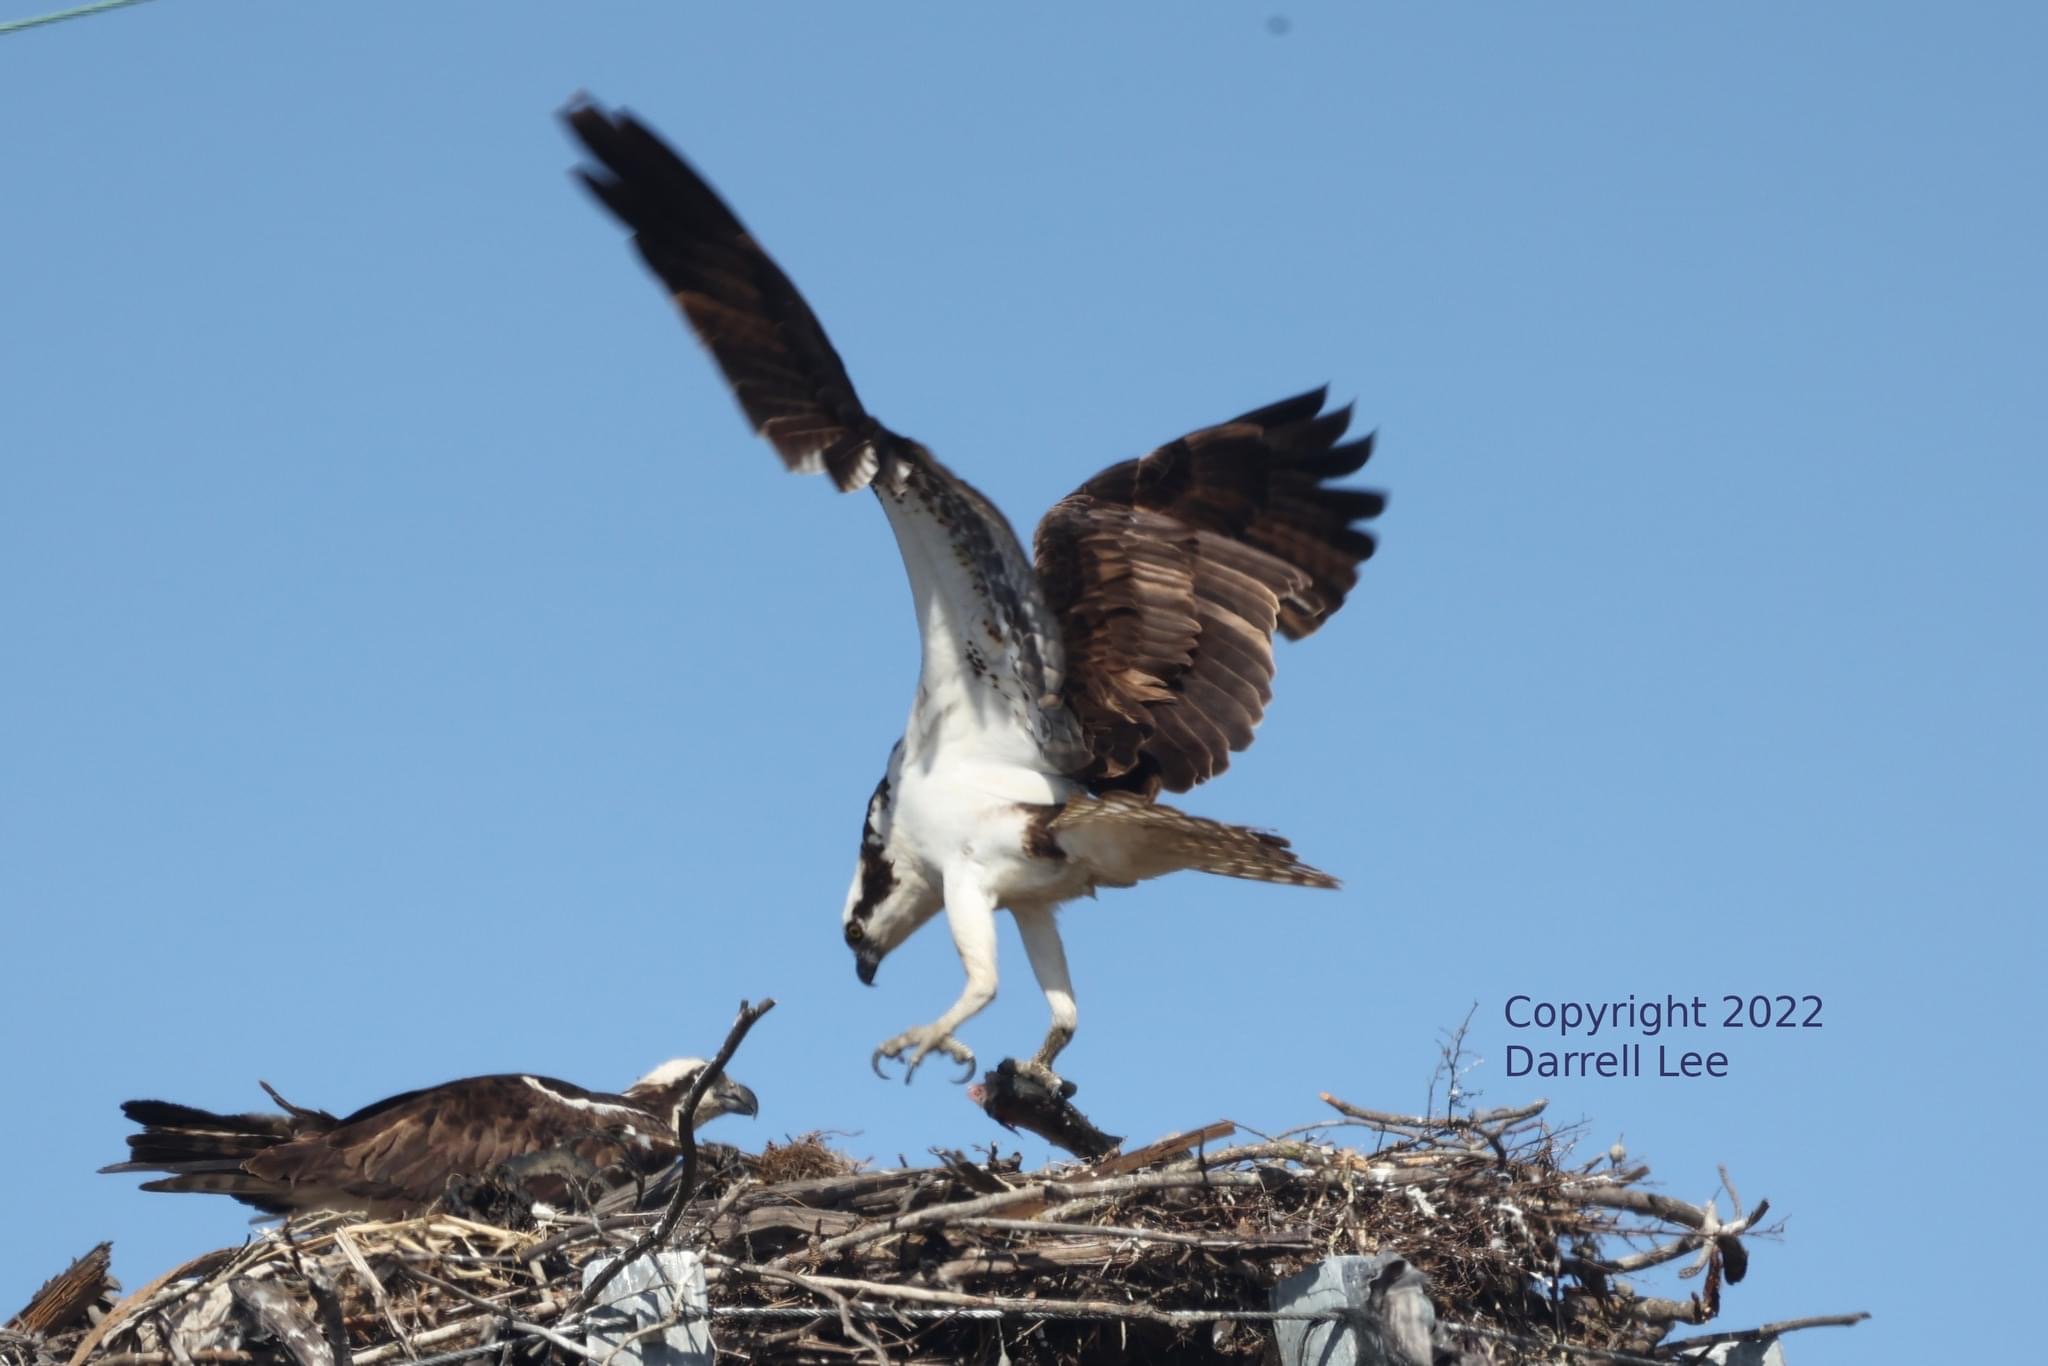 Osprey Days Coming Up! June 24-26, 2022 Here’s the Info.